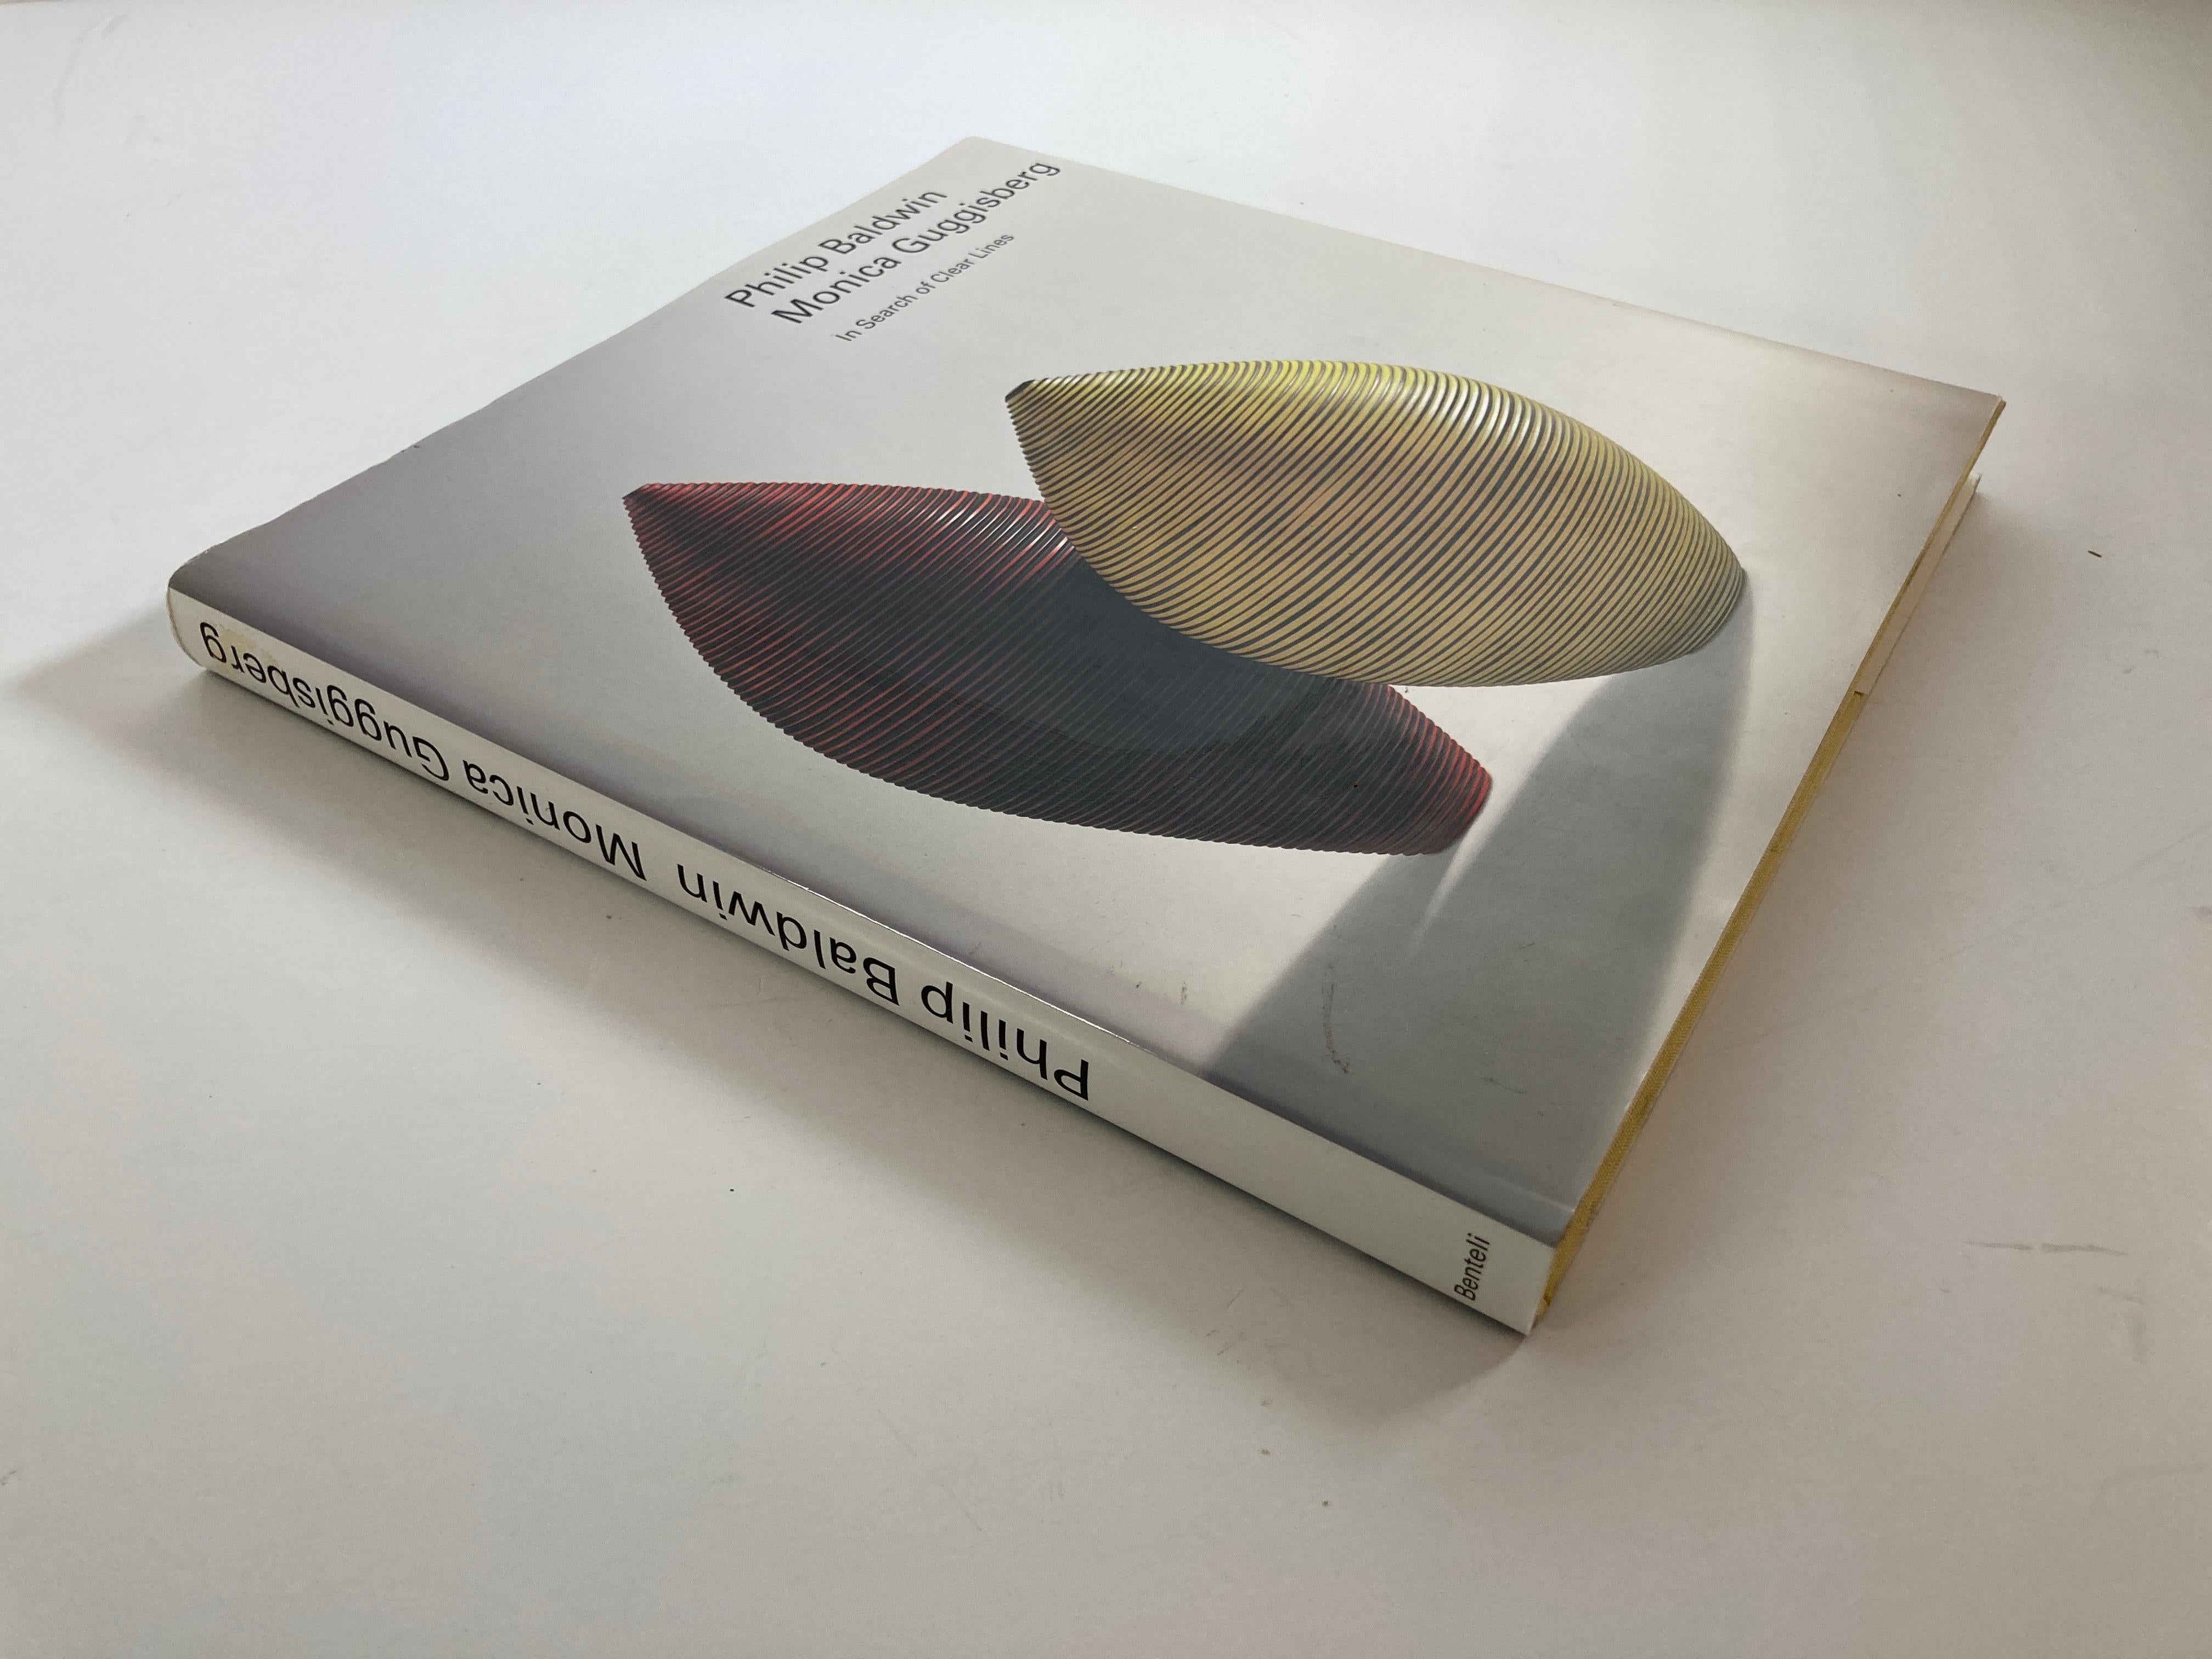 Philip Baldwin, Monica Guggisberg In Search Of Clear Lines, Buch (Arts and Crafts) im Angebot